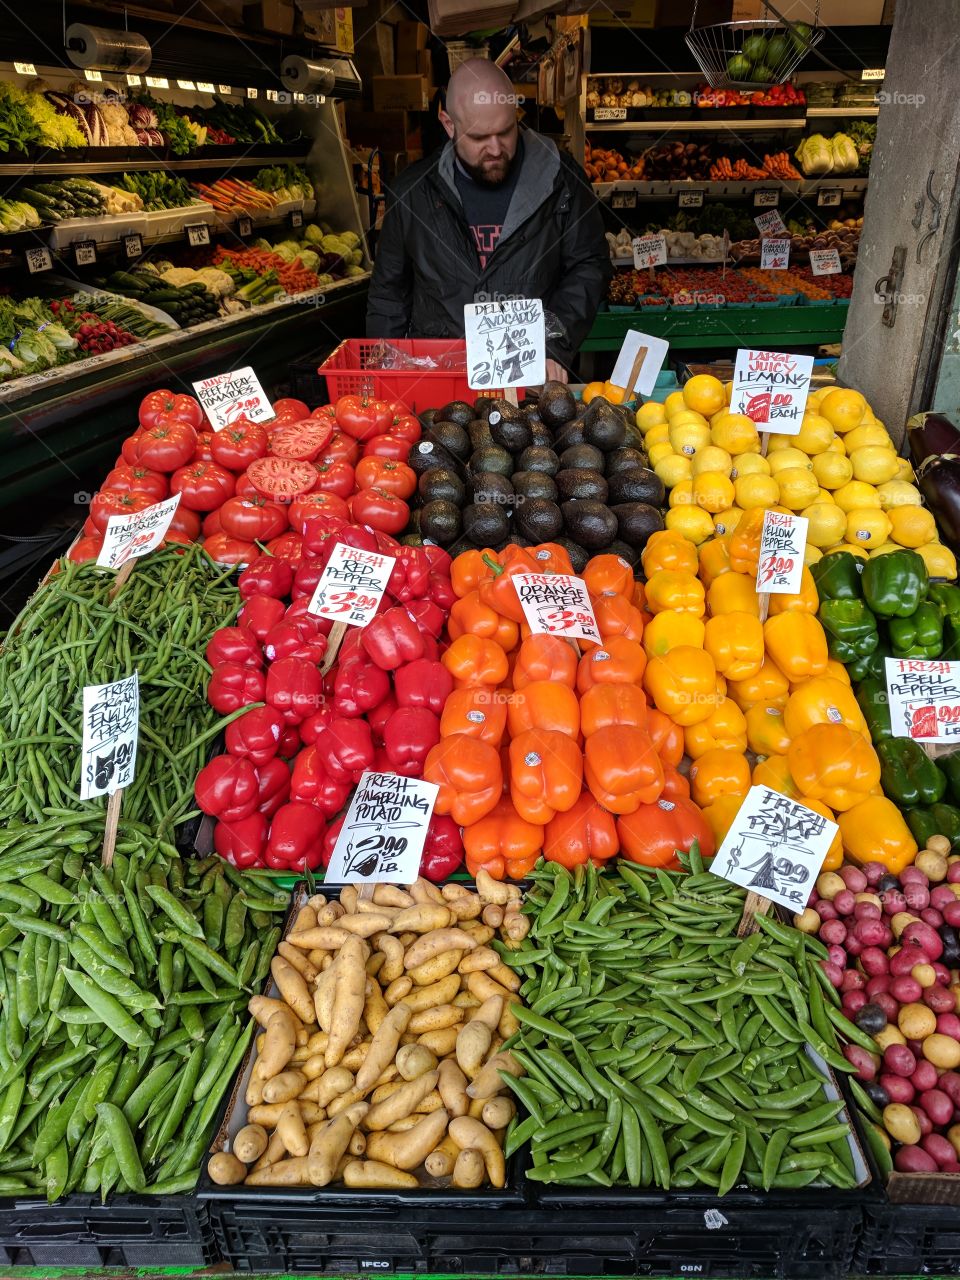 Beautiful, fresh, colorful, vegetables at Pike's Market. The oldest farmer's market in the country. Seattle, Washington.